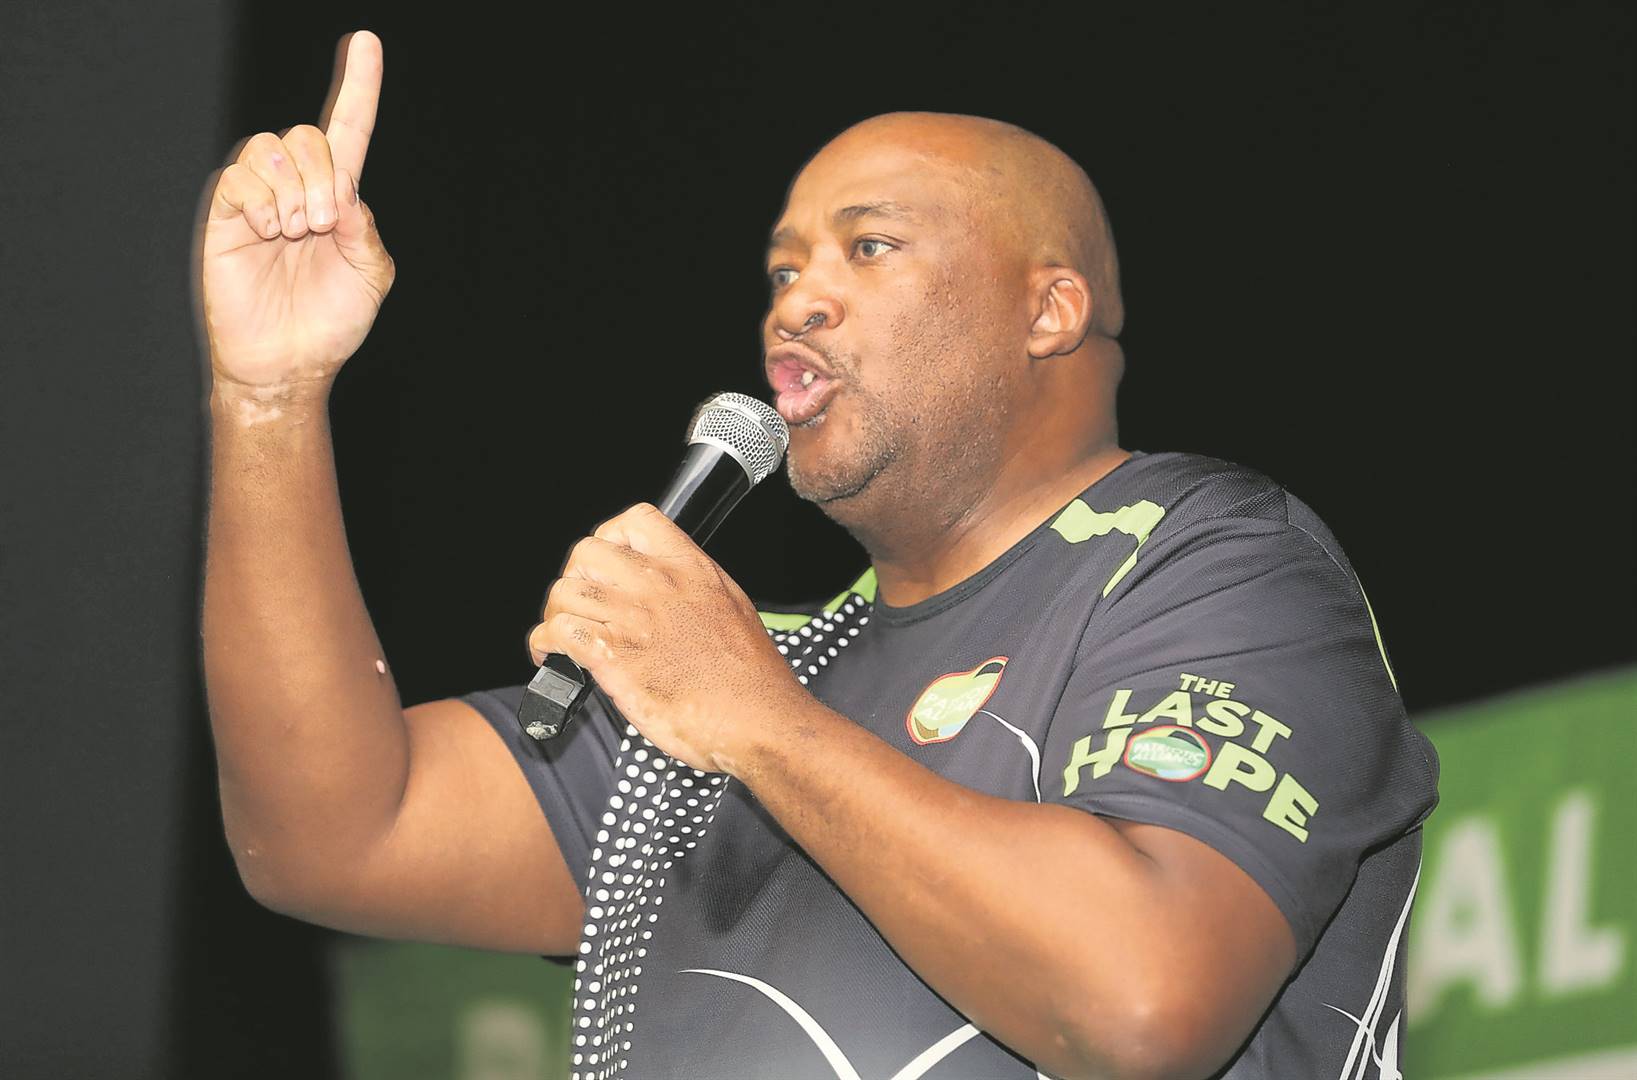 Patriotic Alliance leader Gayton McKenzie claims the Western Cape has become the prime destination for illegal foreign nationals in South Africa